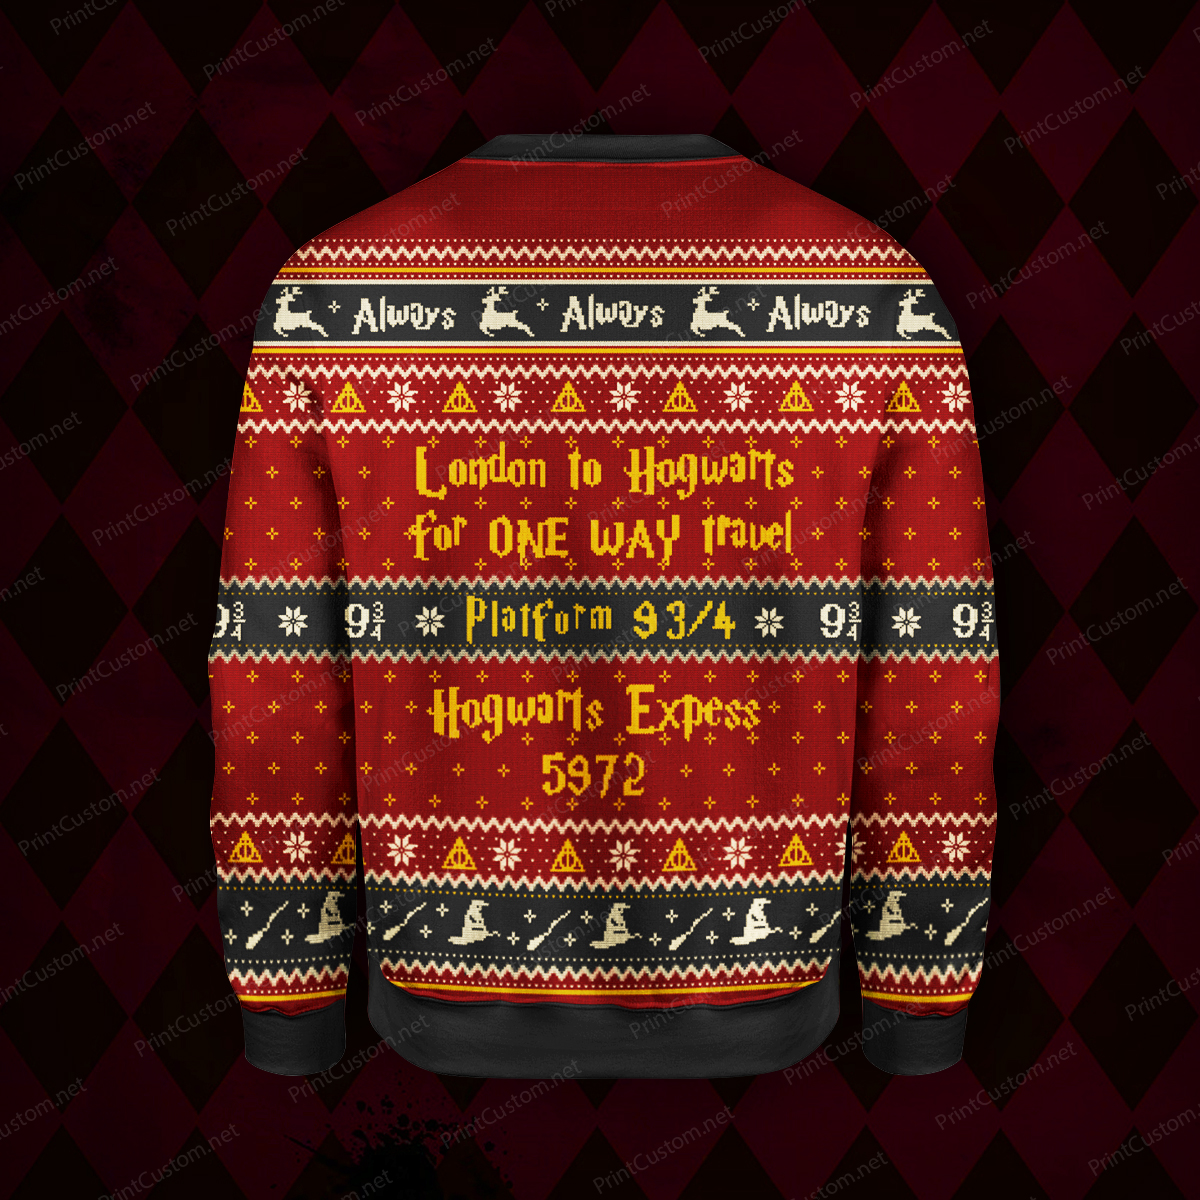 King's cross station harry potter full printing ugly christmas sweater 2